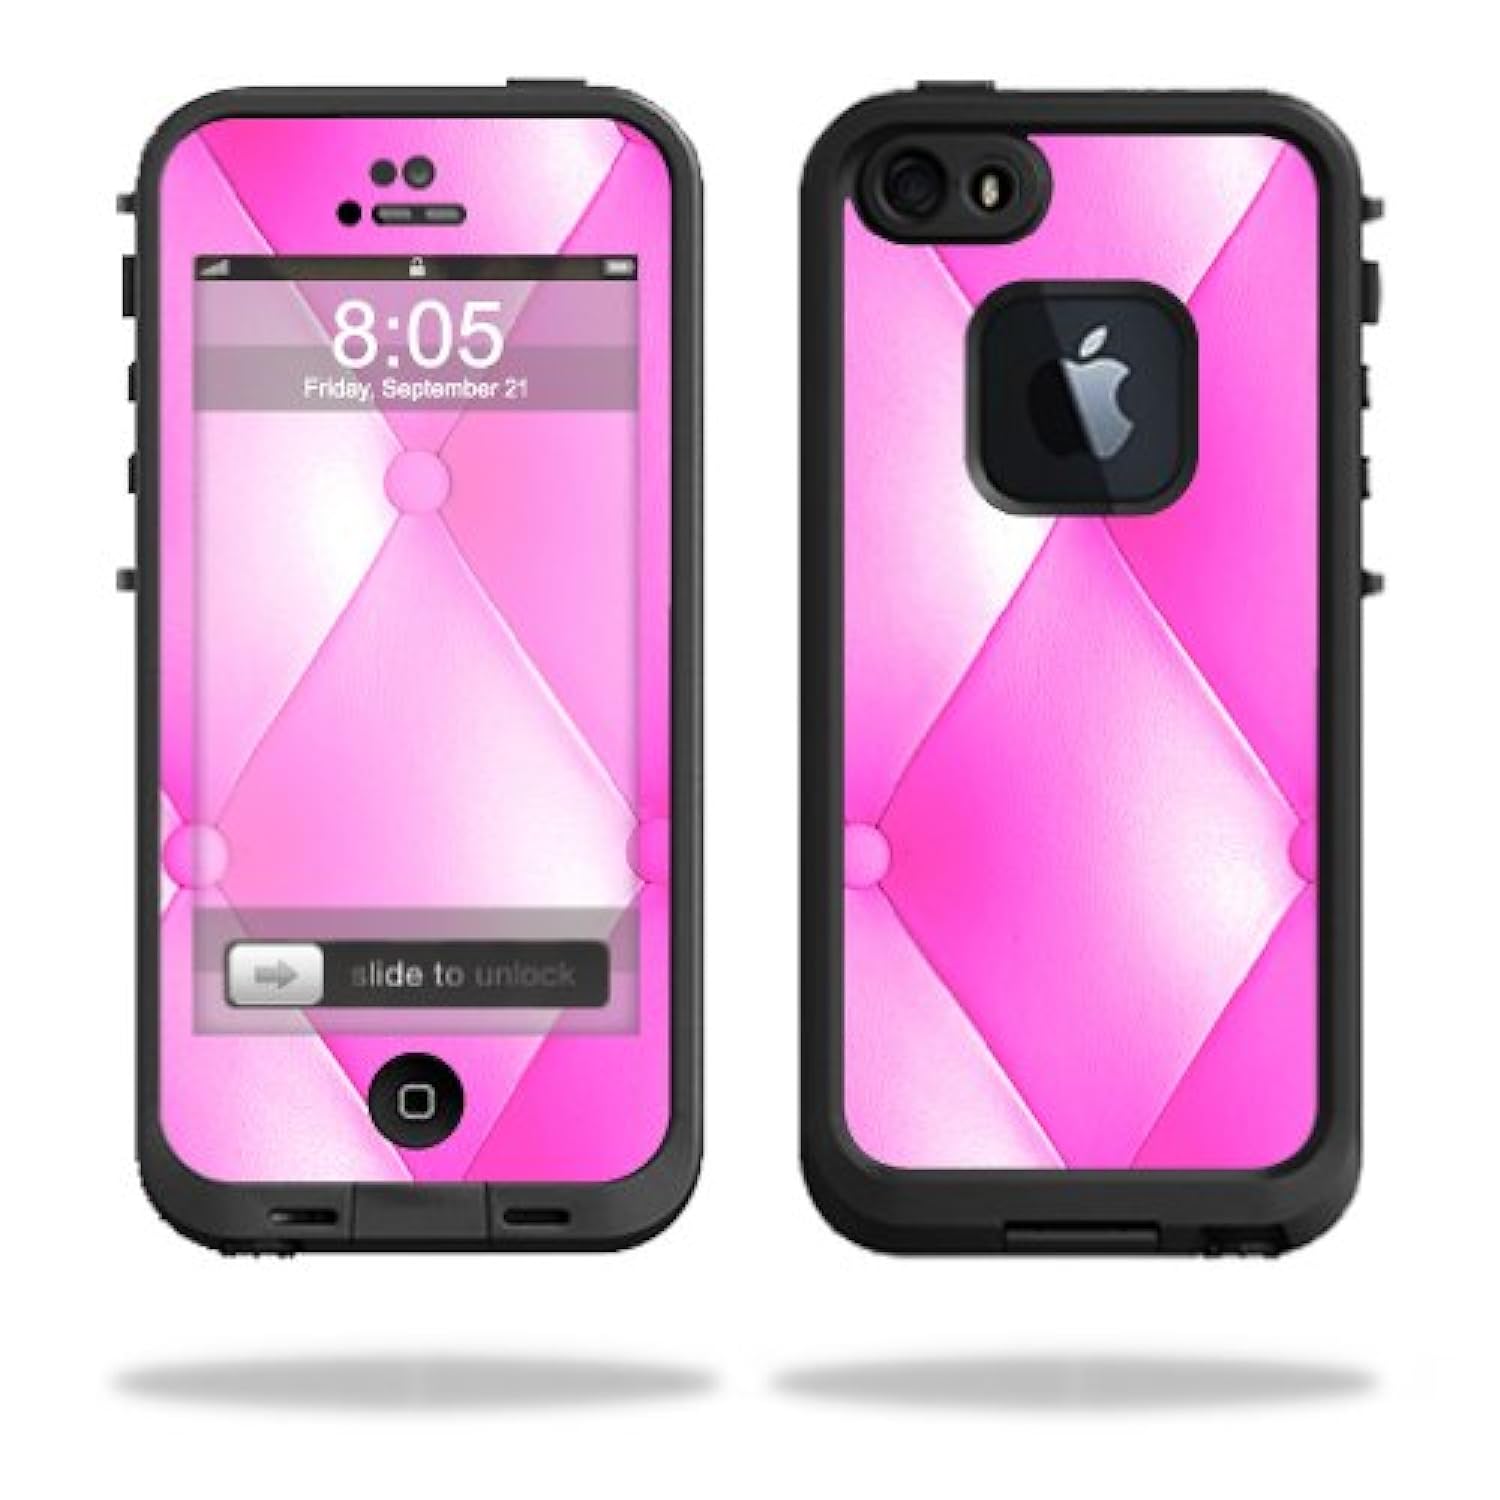 398mo 00 B00gs 1 Mightyskins Skin Compatible With Lifeproof Iphone 5 5s Se Case Fre Case Wrap Sticker Skins Pink Upholstery